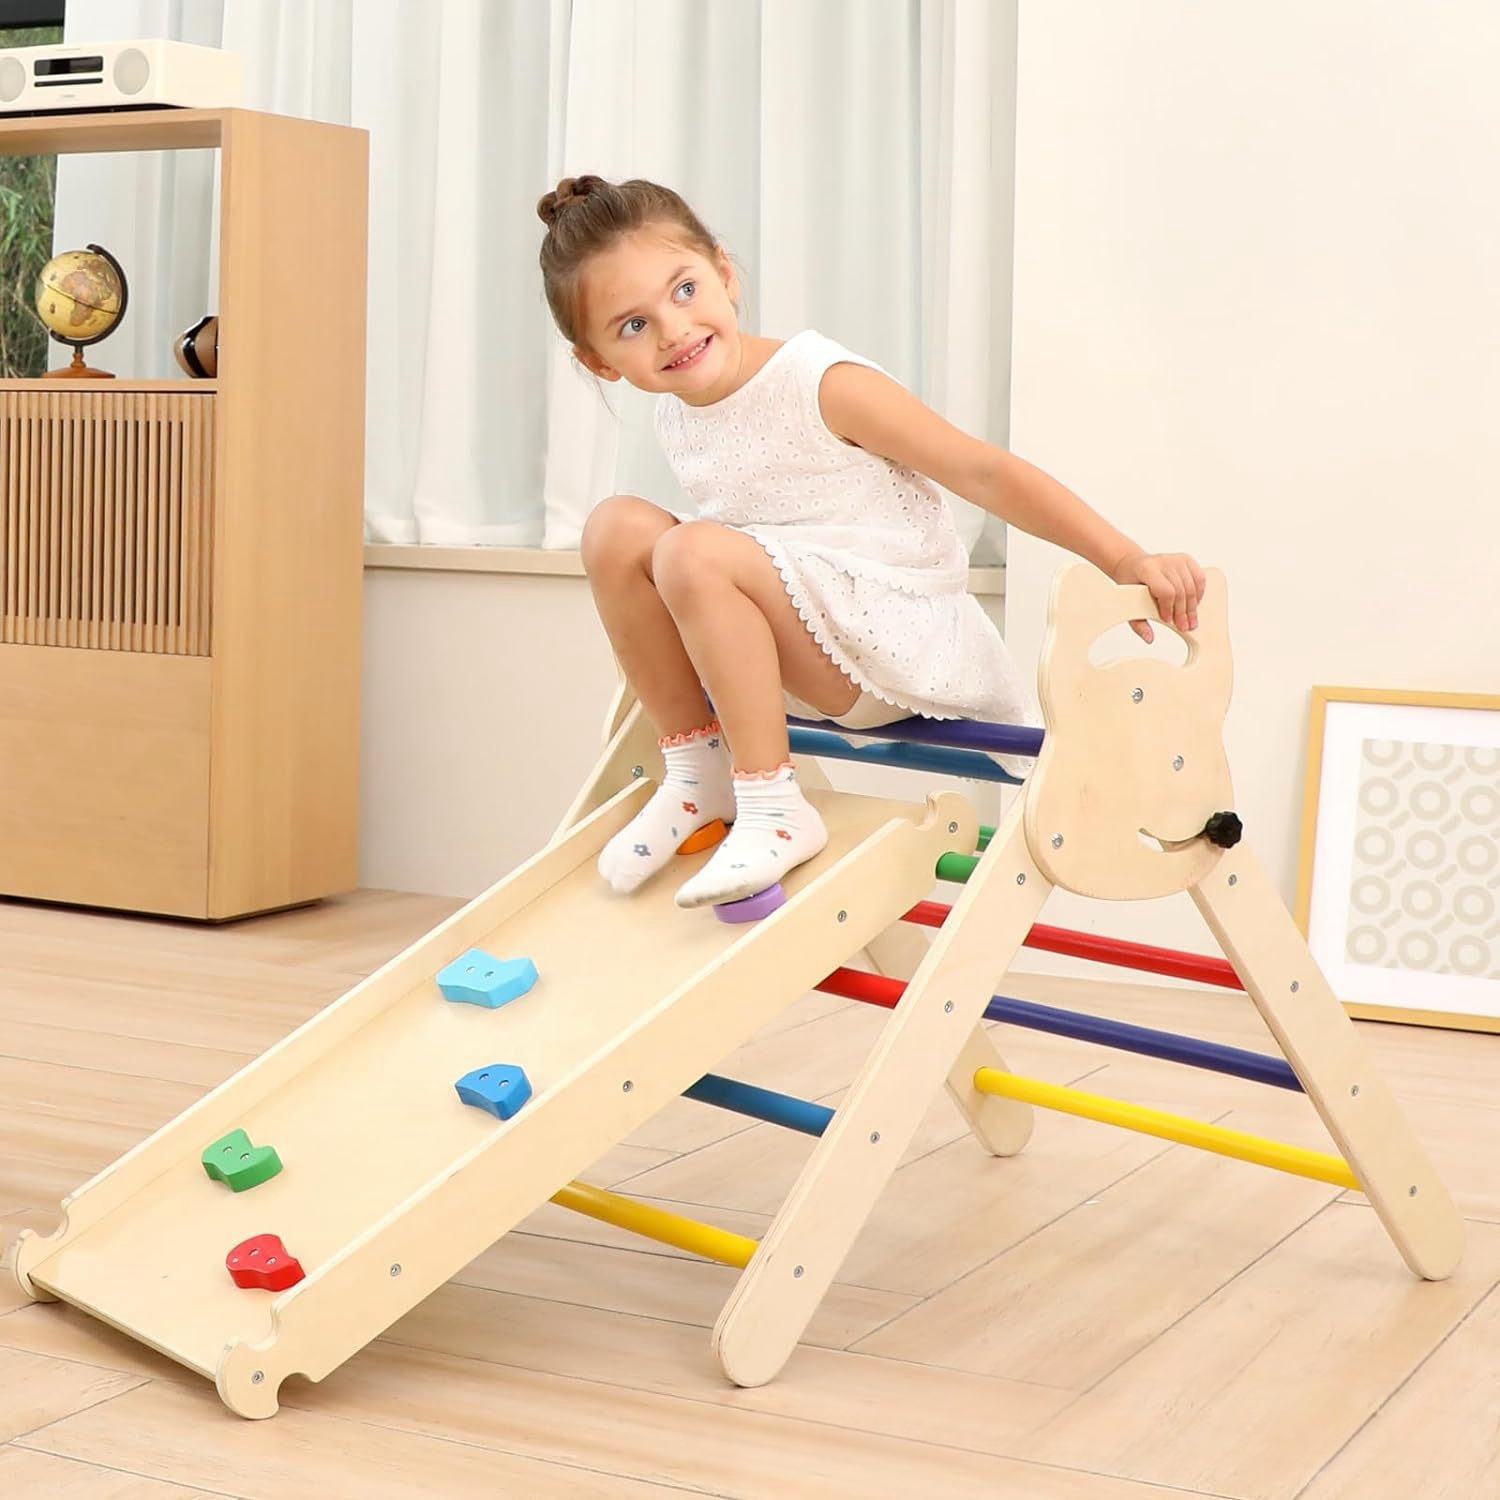 2-in-1 Indoor Foldable Wooden Kids Climbing Triangle Set with Ladder & Slide for Playground